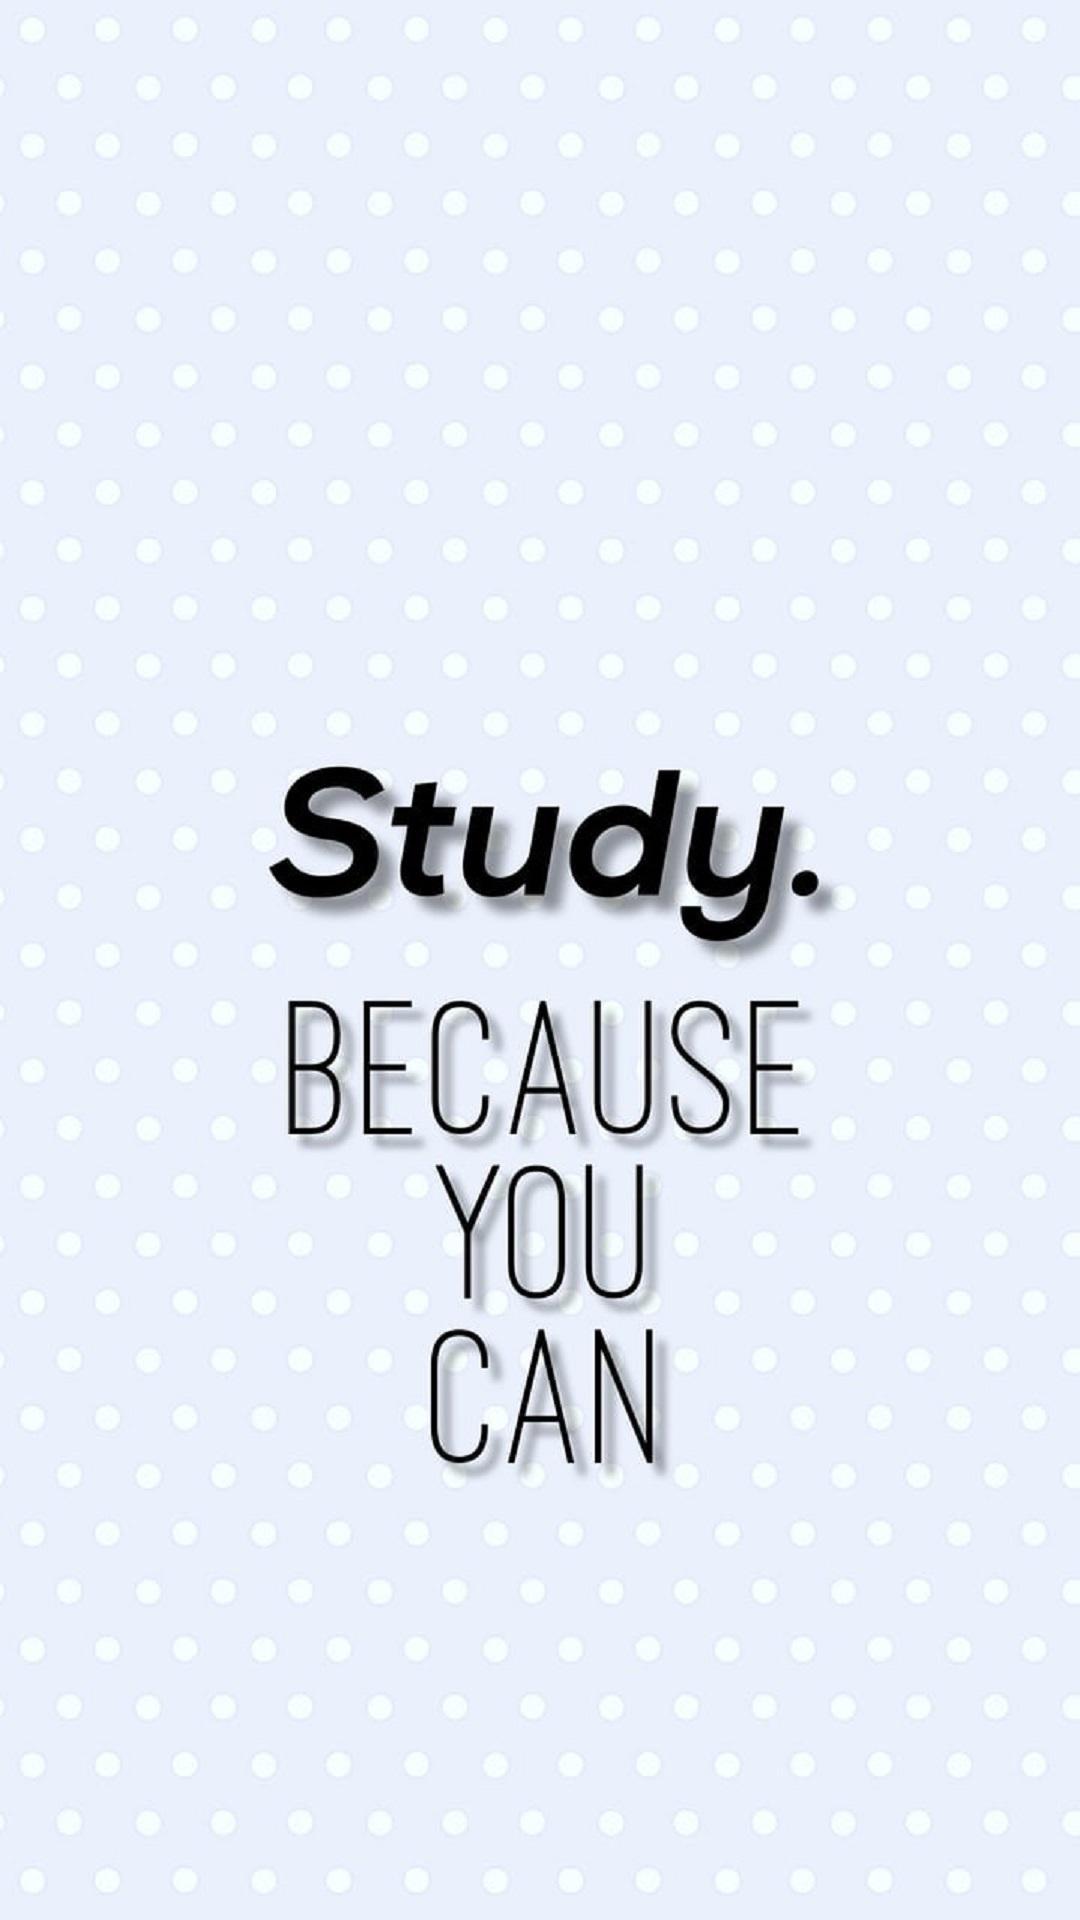 Study because you can. - Study